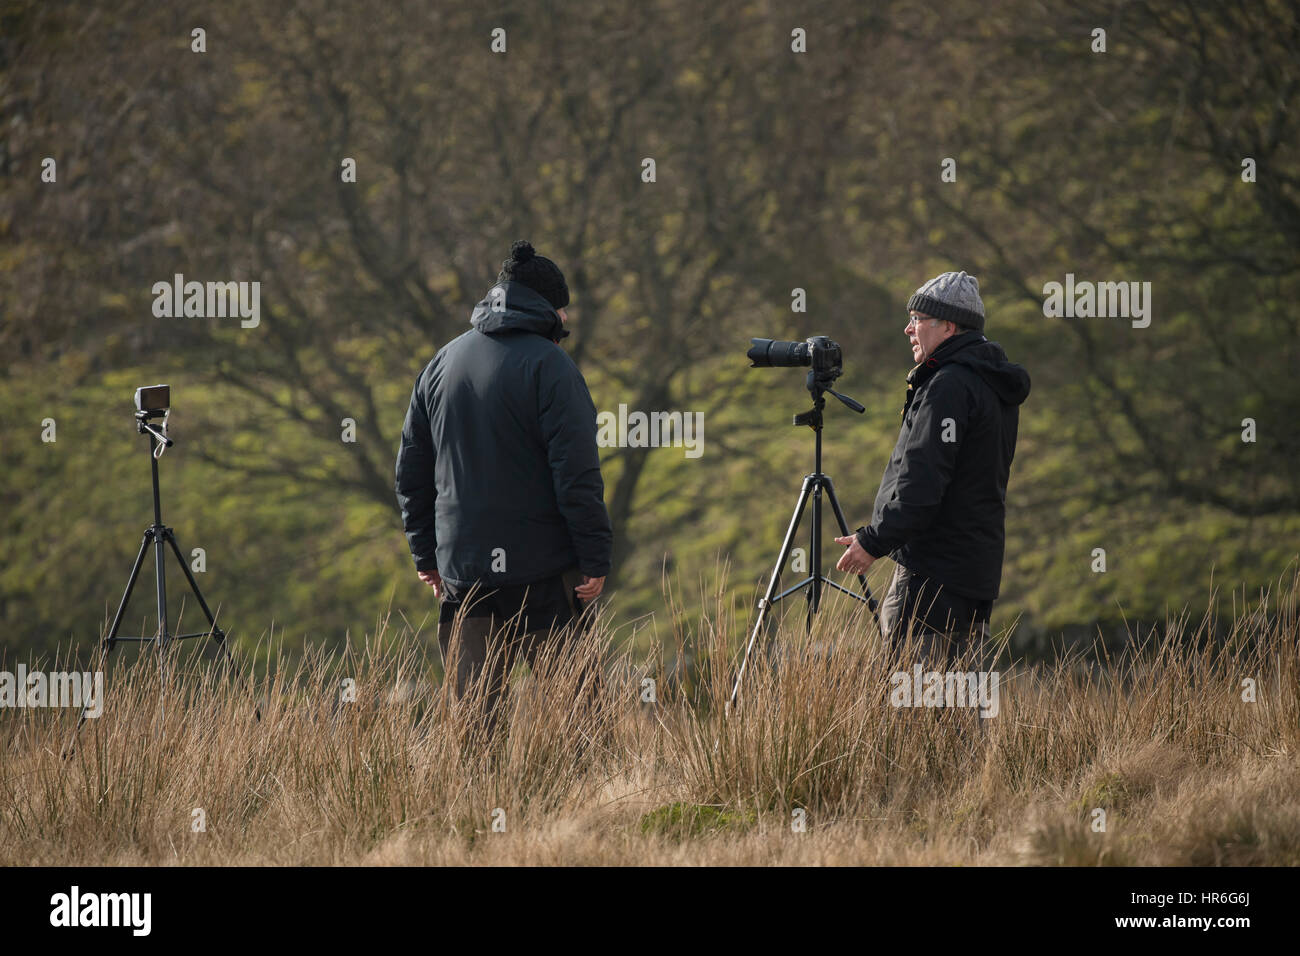 Their cameras on tripods, two male train spotters (enthusiasts) are chatting whilst for waiting for the next train - North Yorkshire, England. Stock Photo